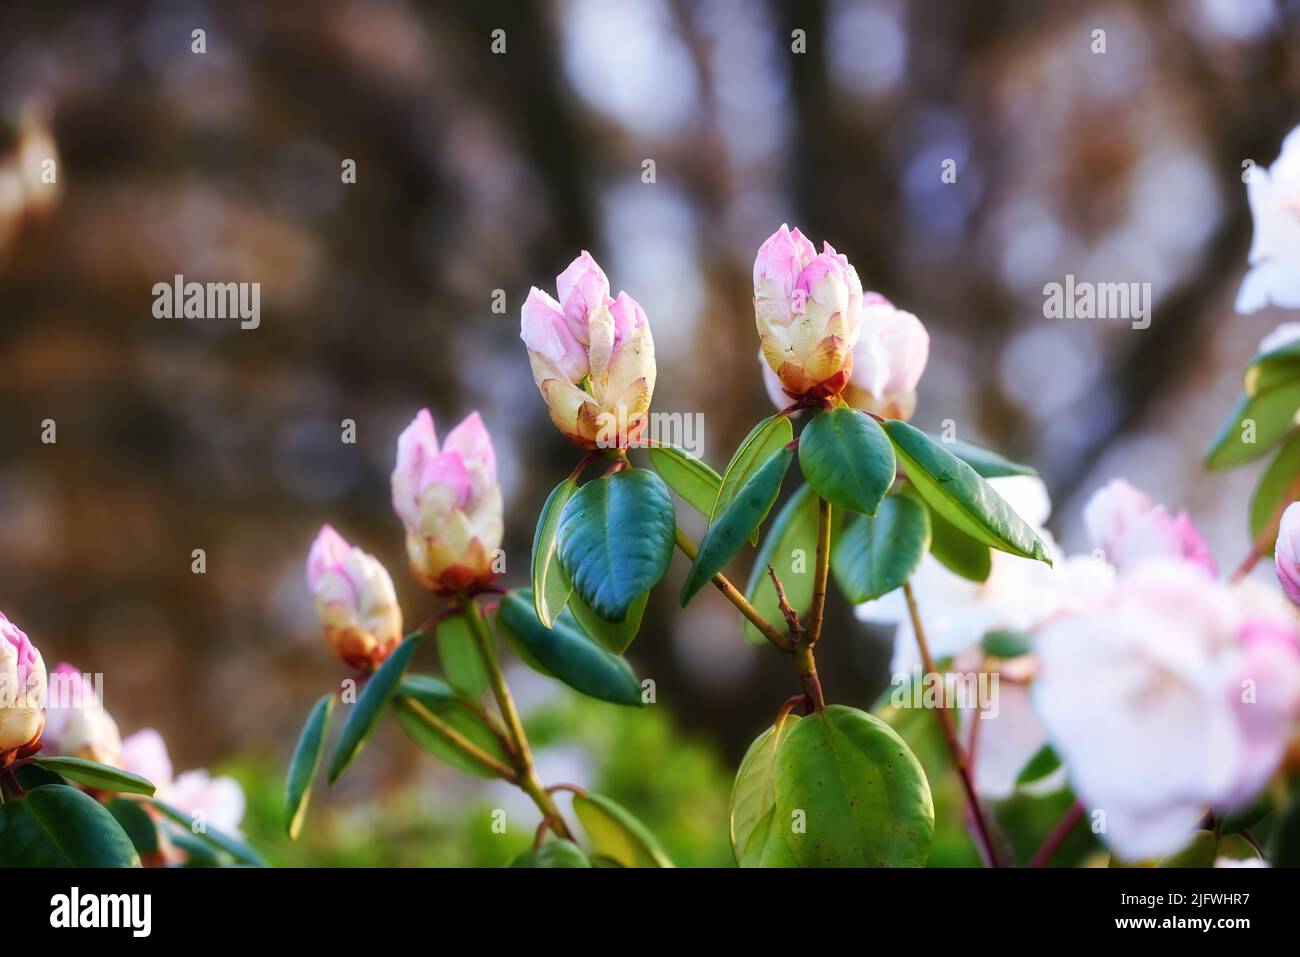 Closeup of Rhododendron flowers blossoming and growing in a garden. Plants blooming during the spring season. Pink bush against a blurred background Stock Photo